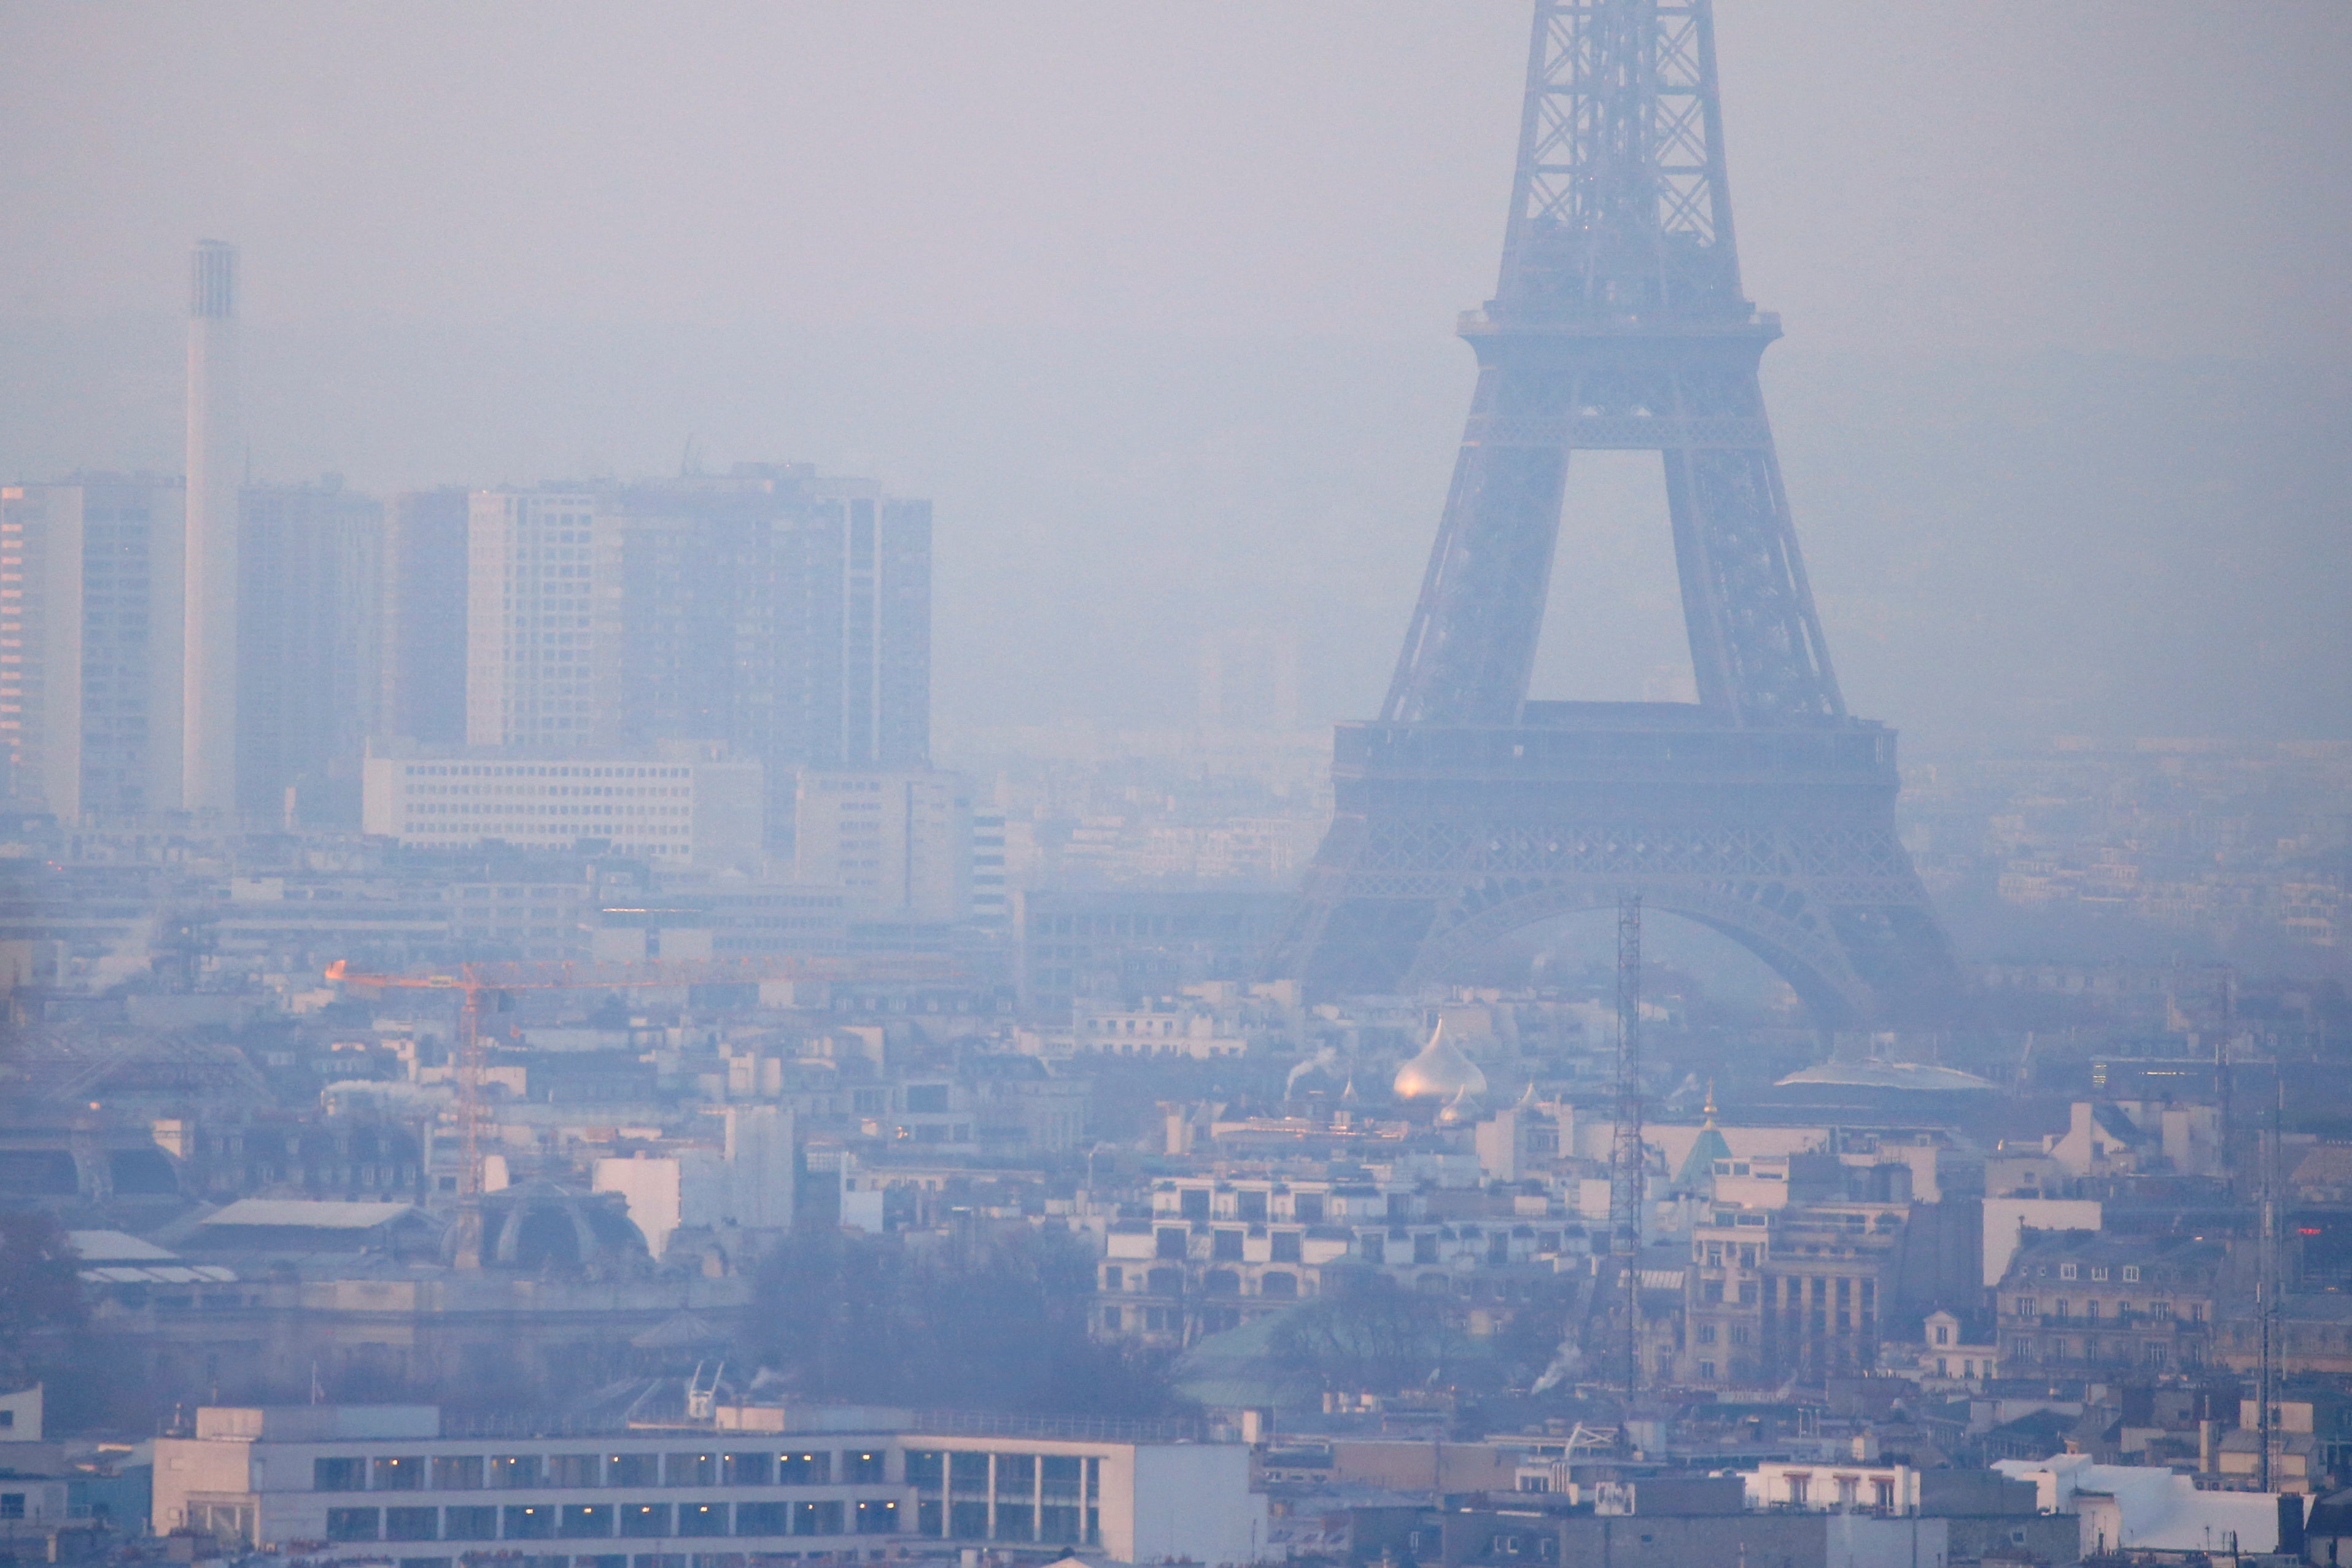 The Eiffel Tower pictured in 2016 when the year experienced the worst air pollution in a decade